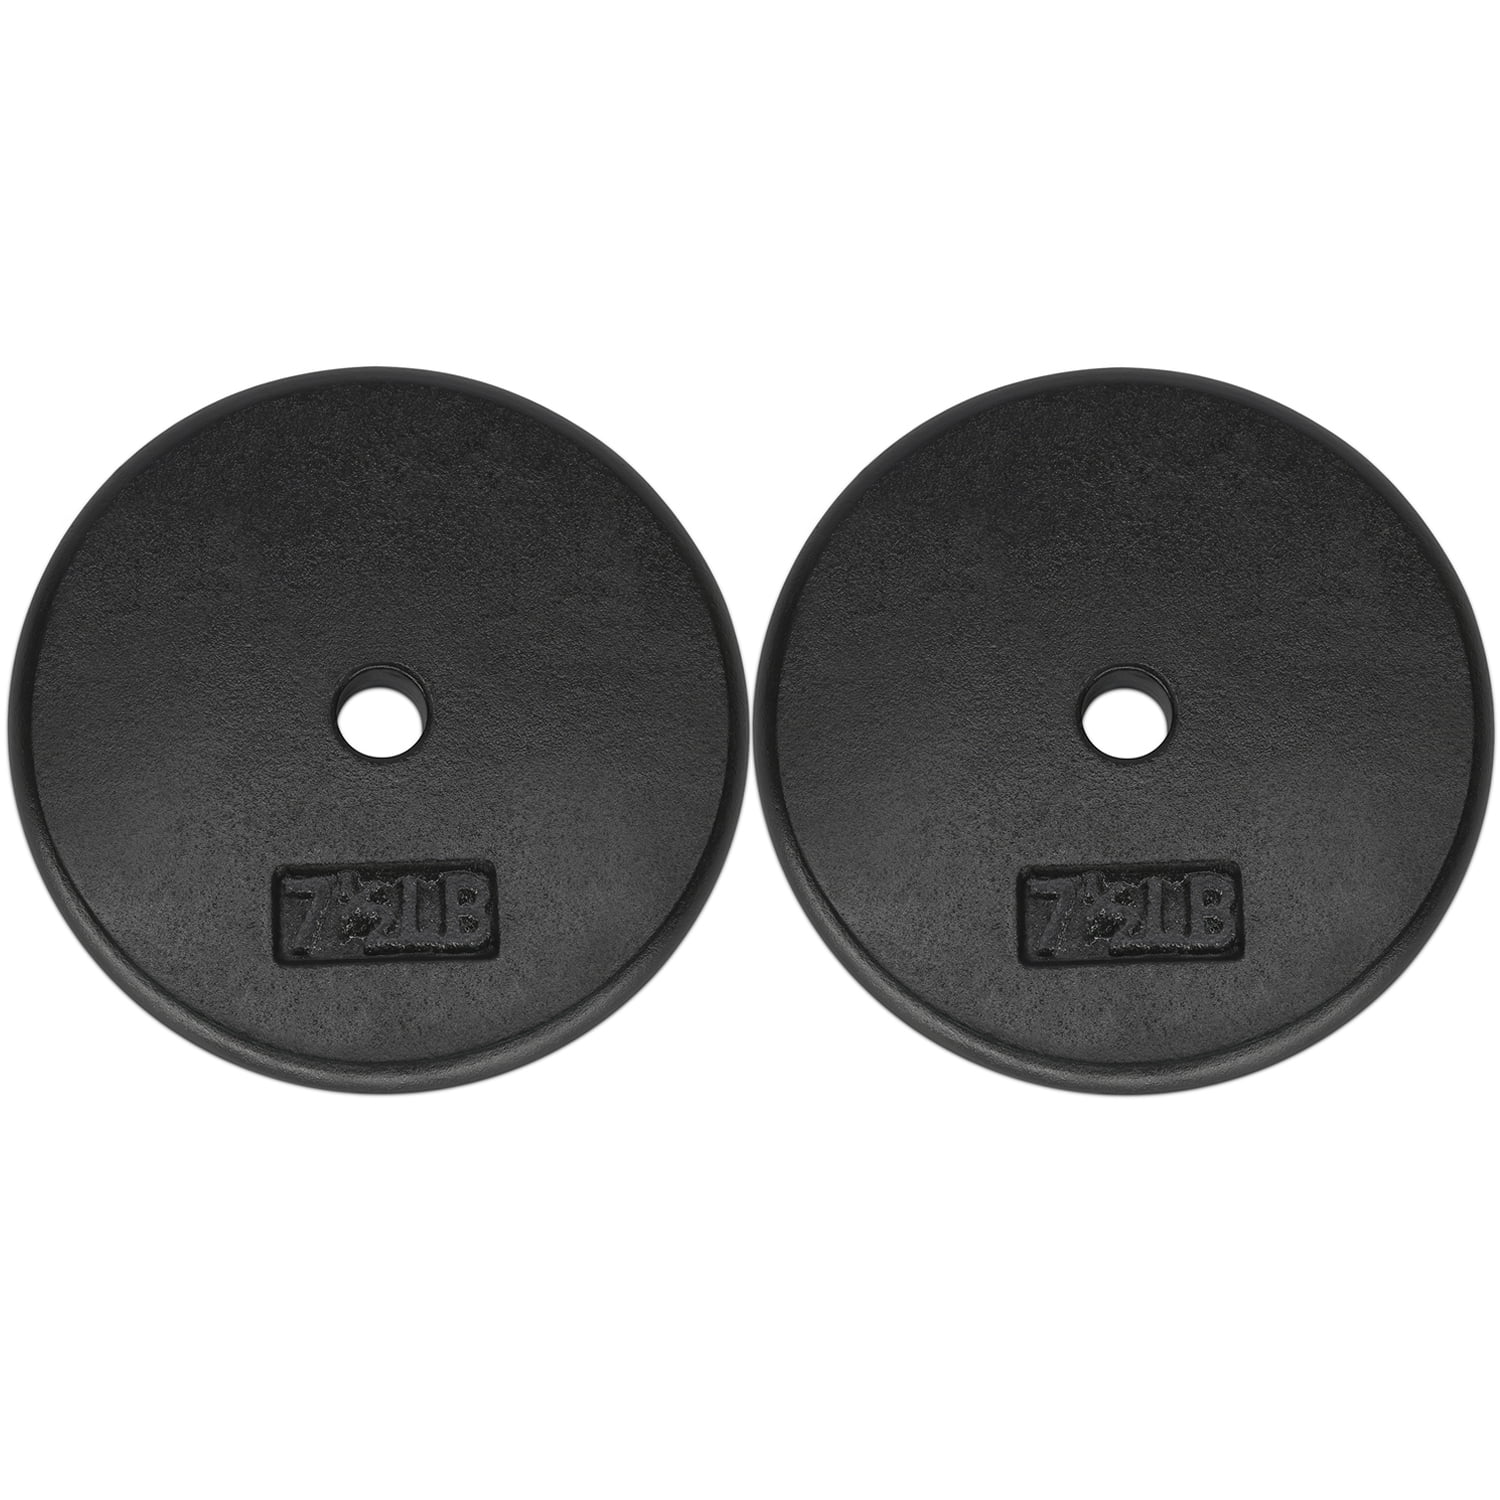 Standard 1" Center Pair Set 20lbs 4  DP Fit For Life 5 lb Iron Weight Plates